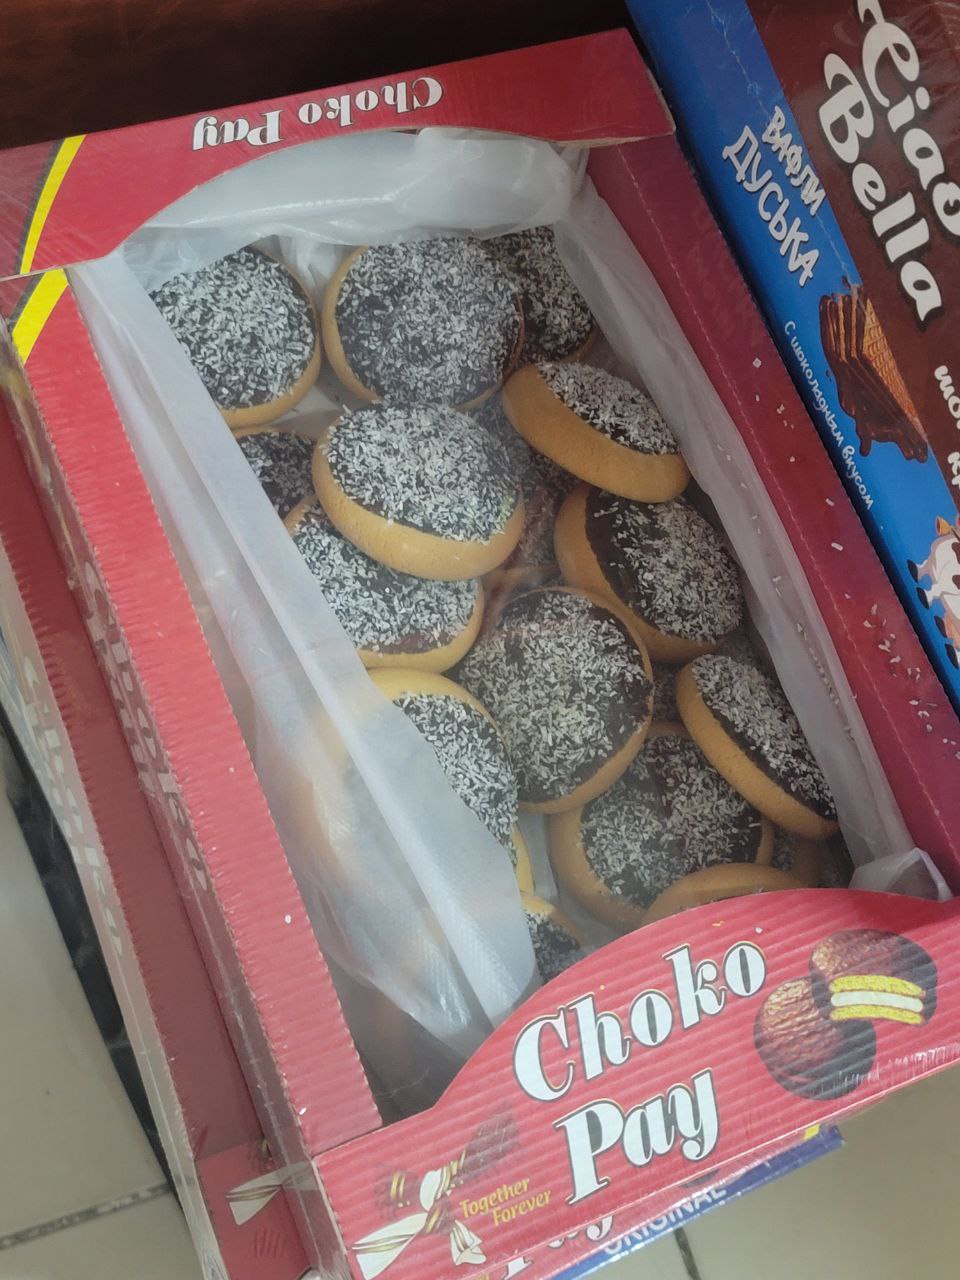 red box with a picture of a layered chocolate and cream cookie and text "Choko Pay" on it; able to see cookies through plastic in middle which are topped with chocolate cream and powdered sugar but look nothing like the box's picture